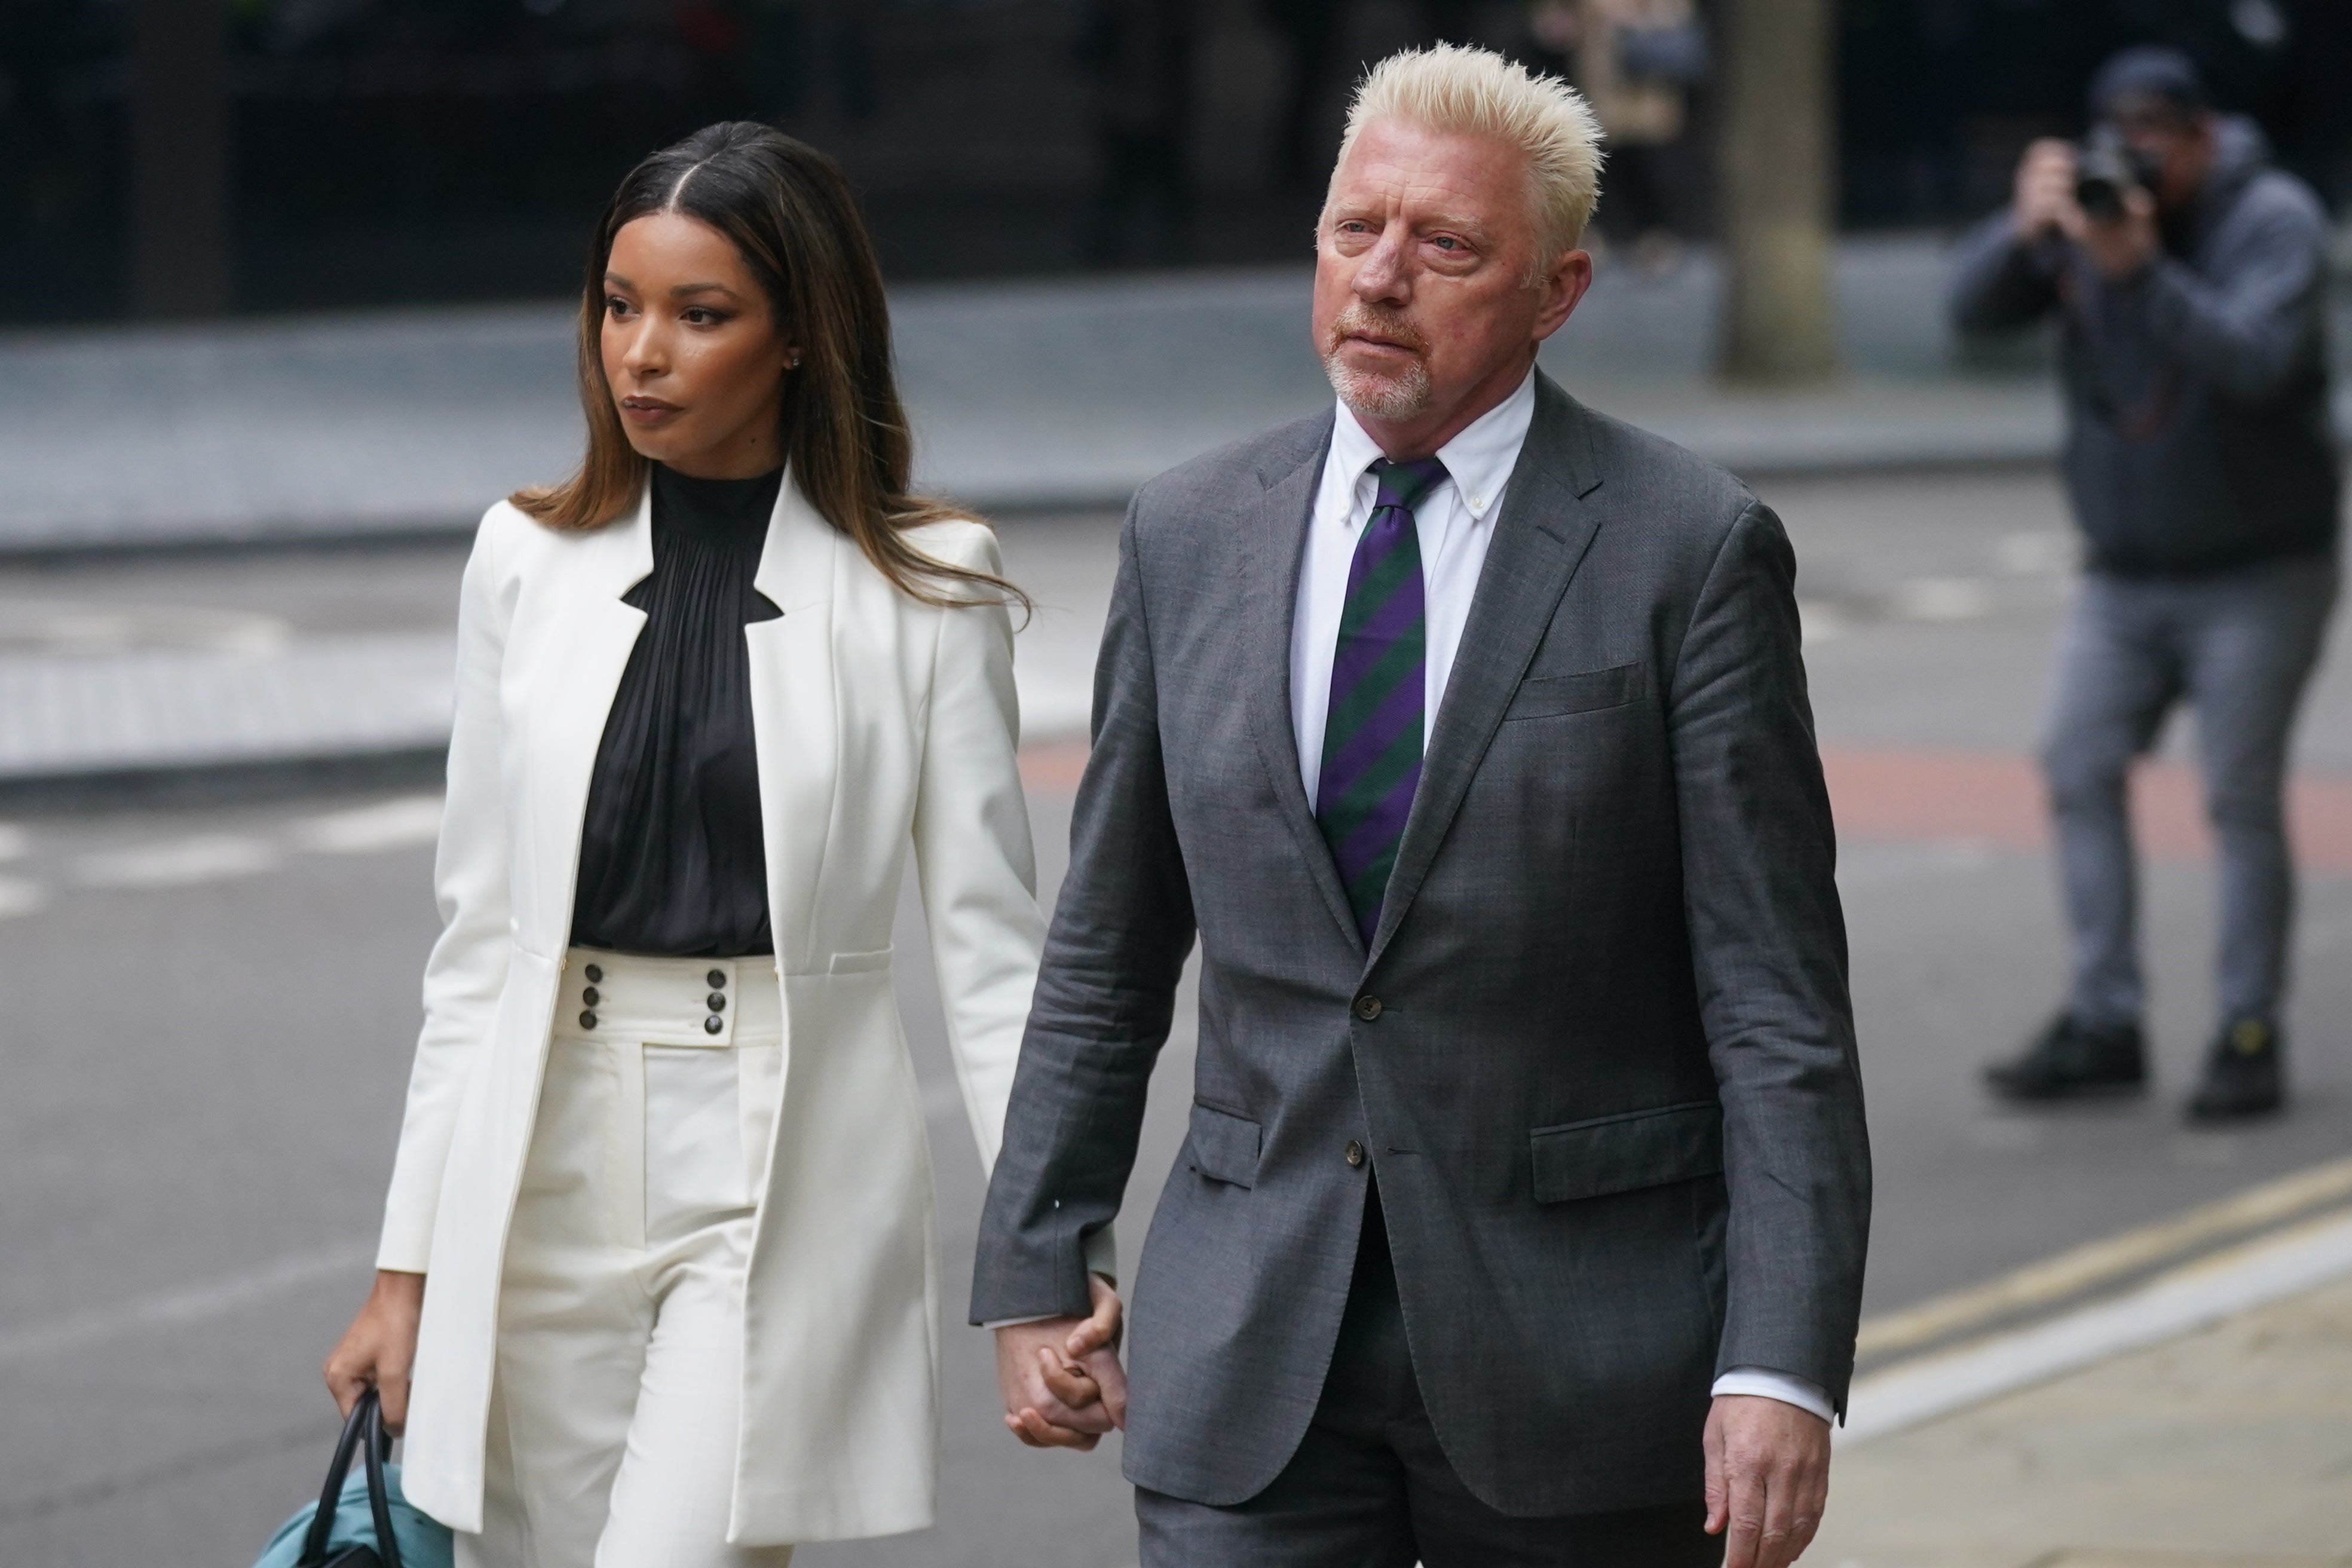 Humiliated' Boris Becker has 'nothing' to show for 'glittering' career |  The Independent